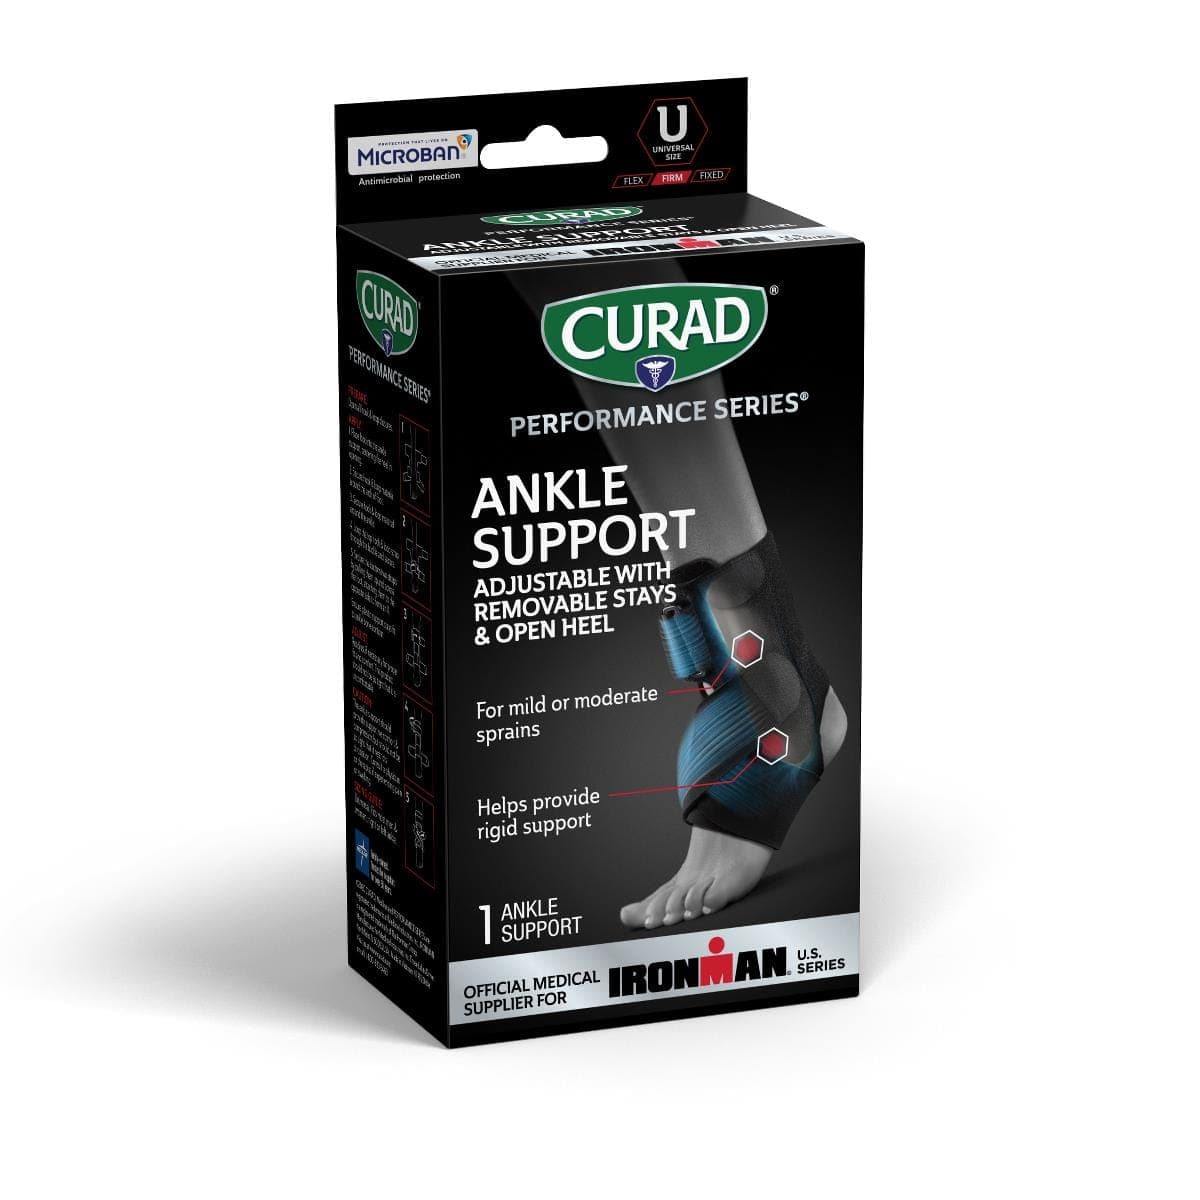 Medline Case of 4 Medline CURAD Performance Series IRONMAN Ankle Supports with Stays